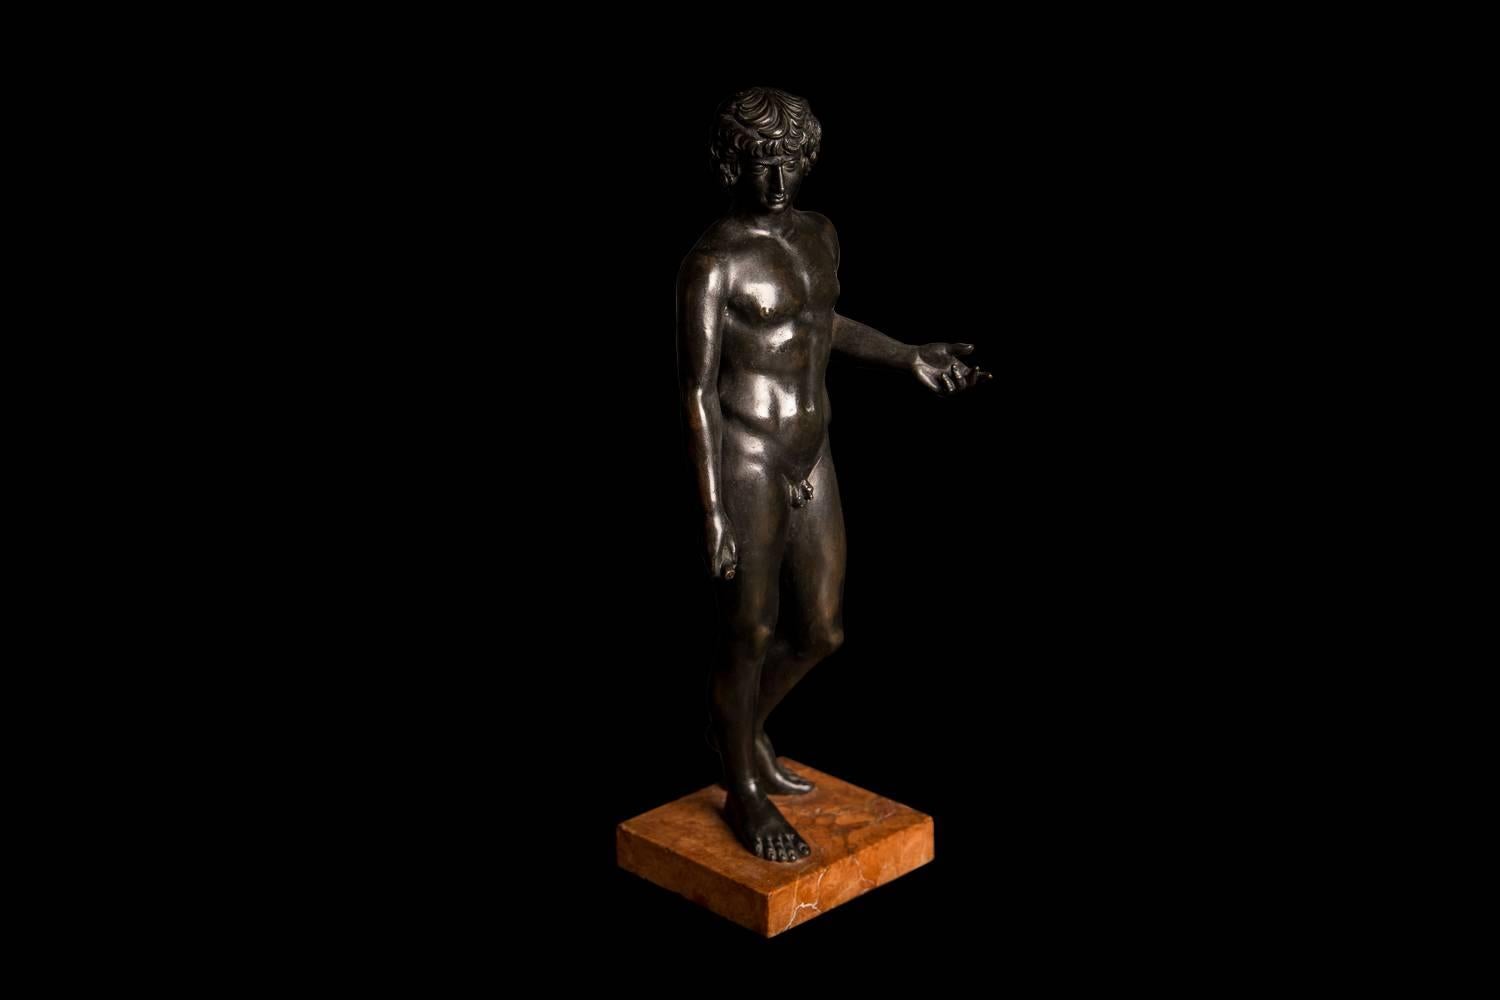 Mounted on red marble base. After the antique - now on display in the Naples National Archaeological Museum. Antinous was the lover of Hadrian and was regarded as the most beautiful man of his age.